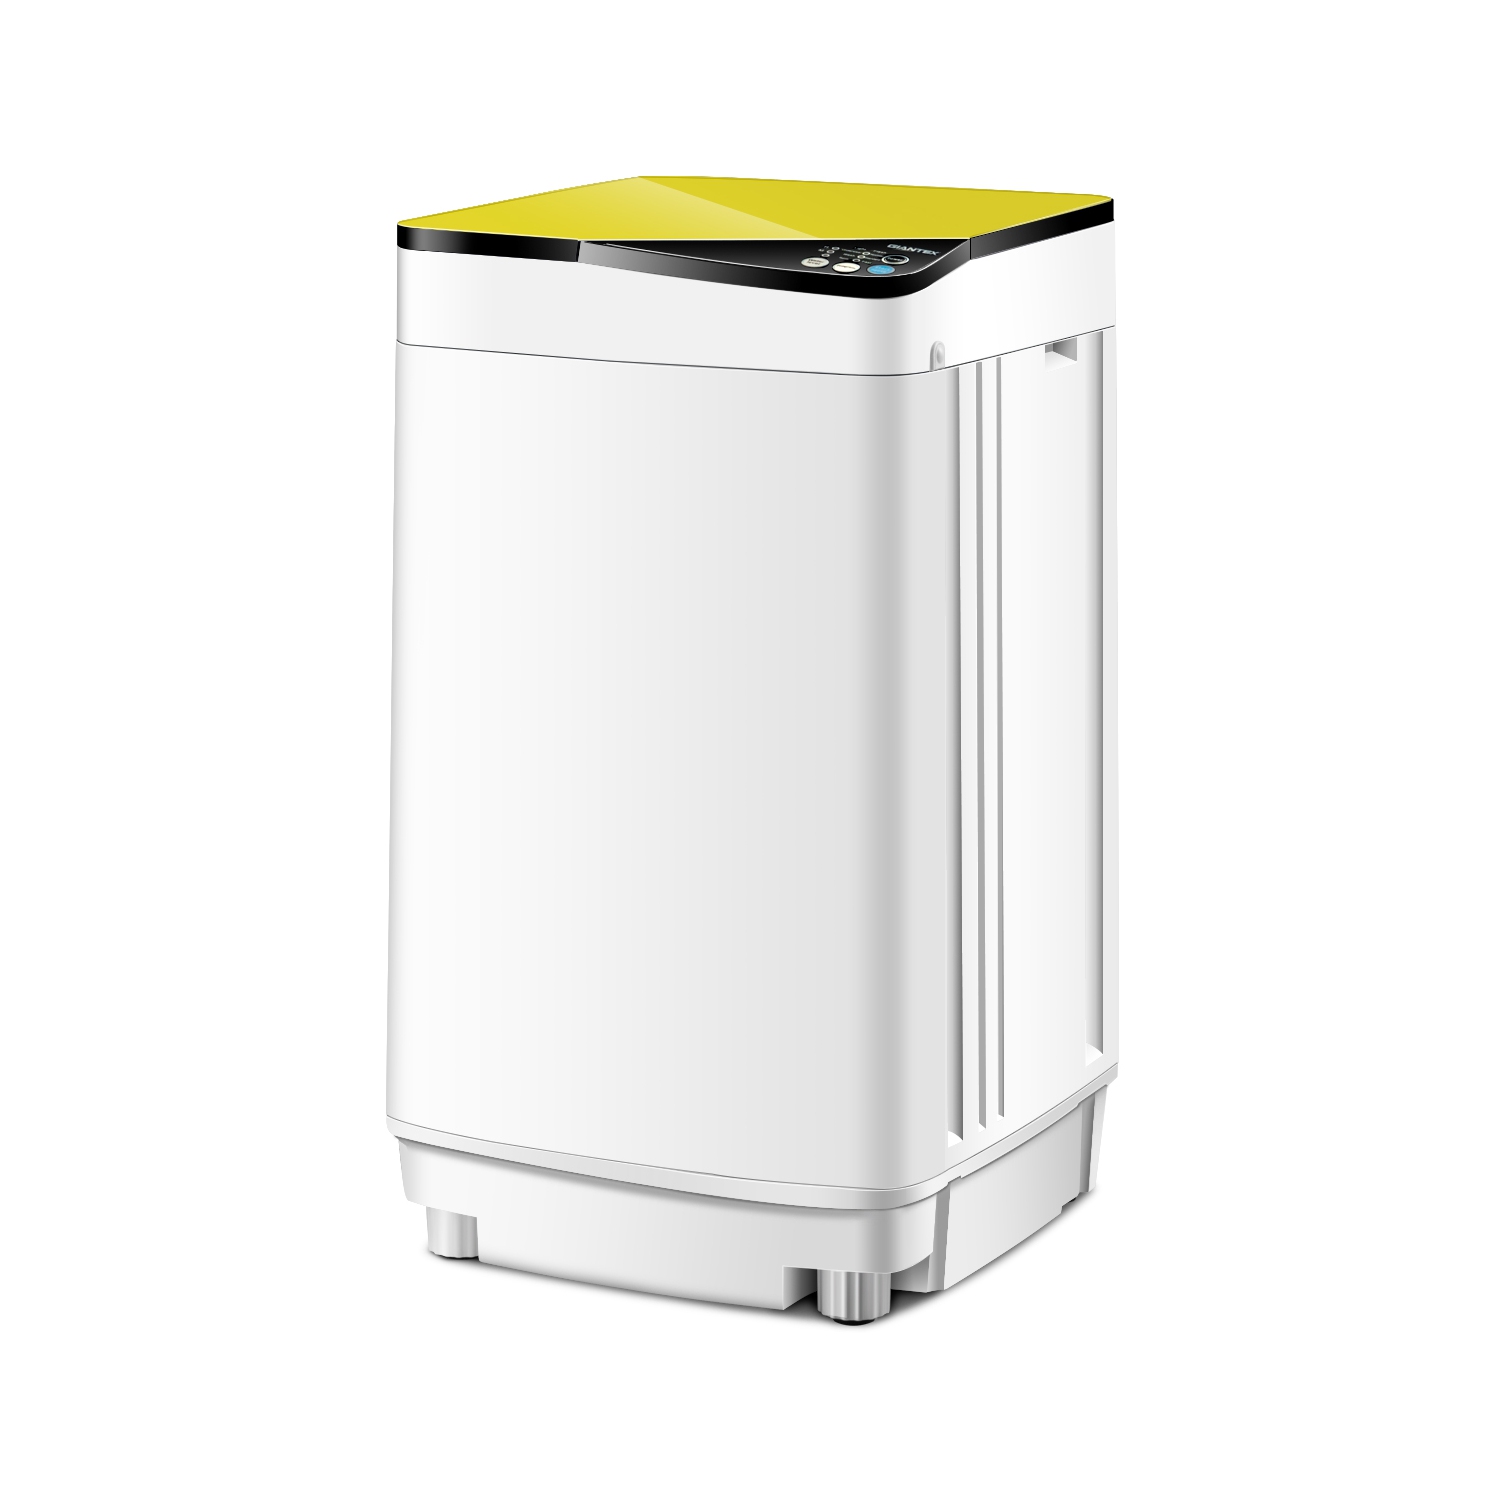 Costway Full-Automatic Portable Washing Machine 7.7lbs Washer with Germicidal UV-Light Spinner - Yellow